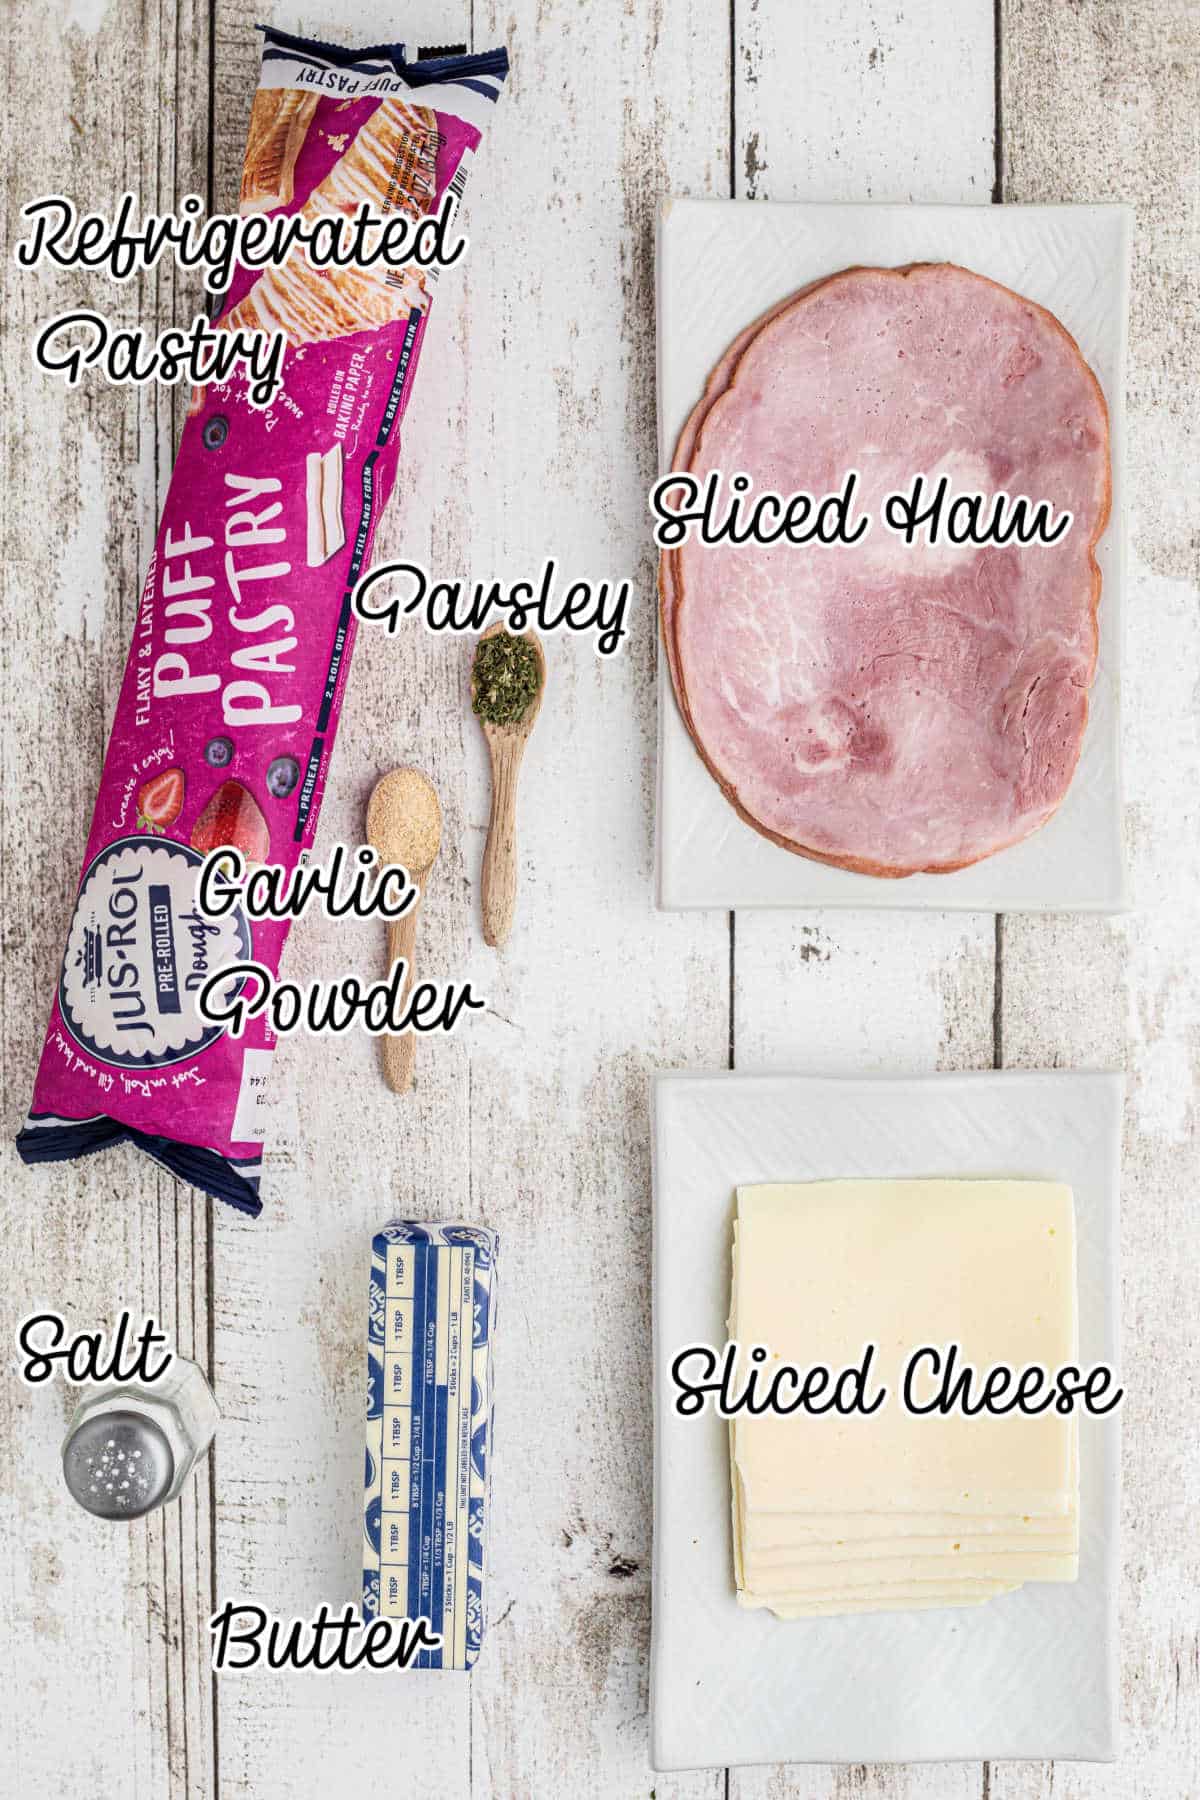 Overhead shot of some ingredients needed to make ham and cheese bites.